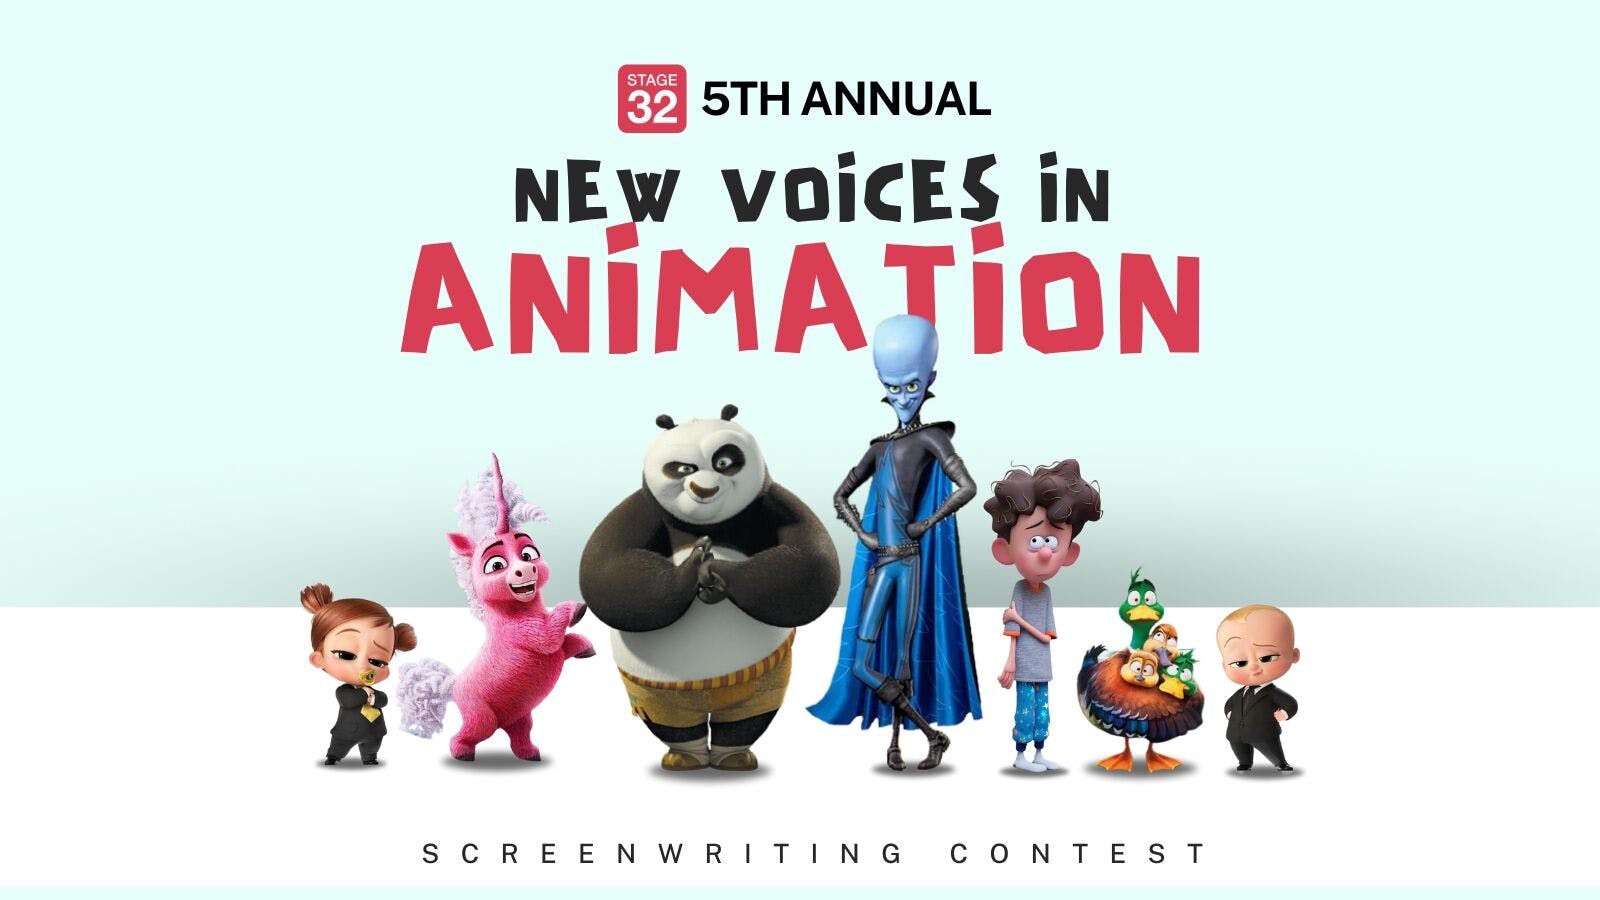 Announcing the 5th Annual New Voices in Animation Screenwriting Contest